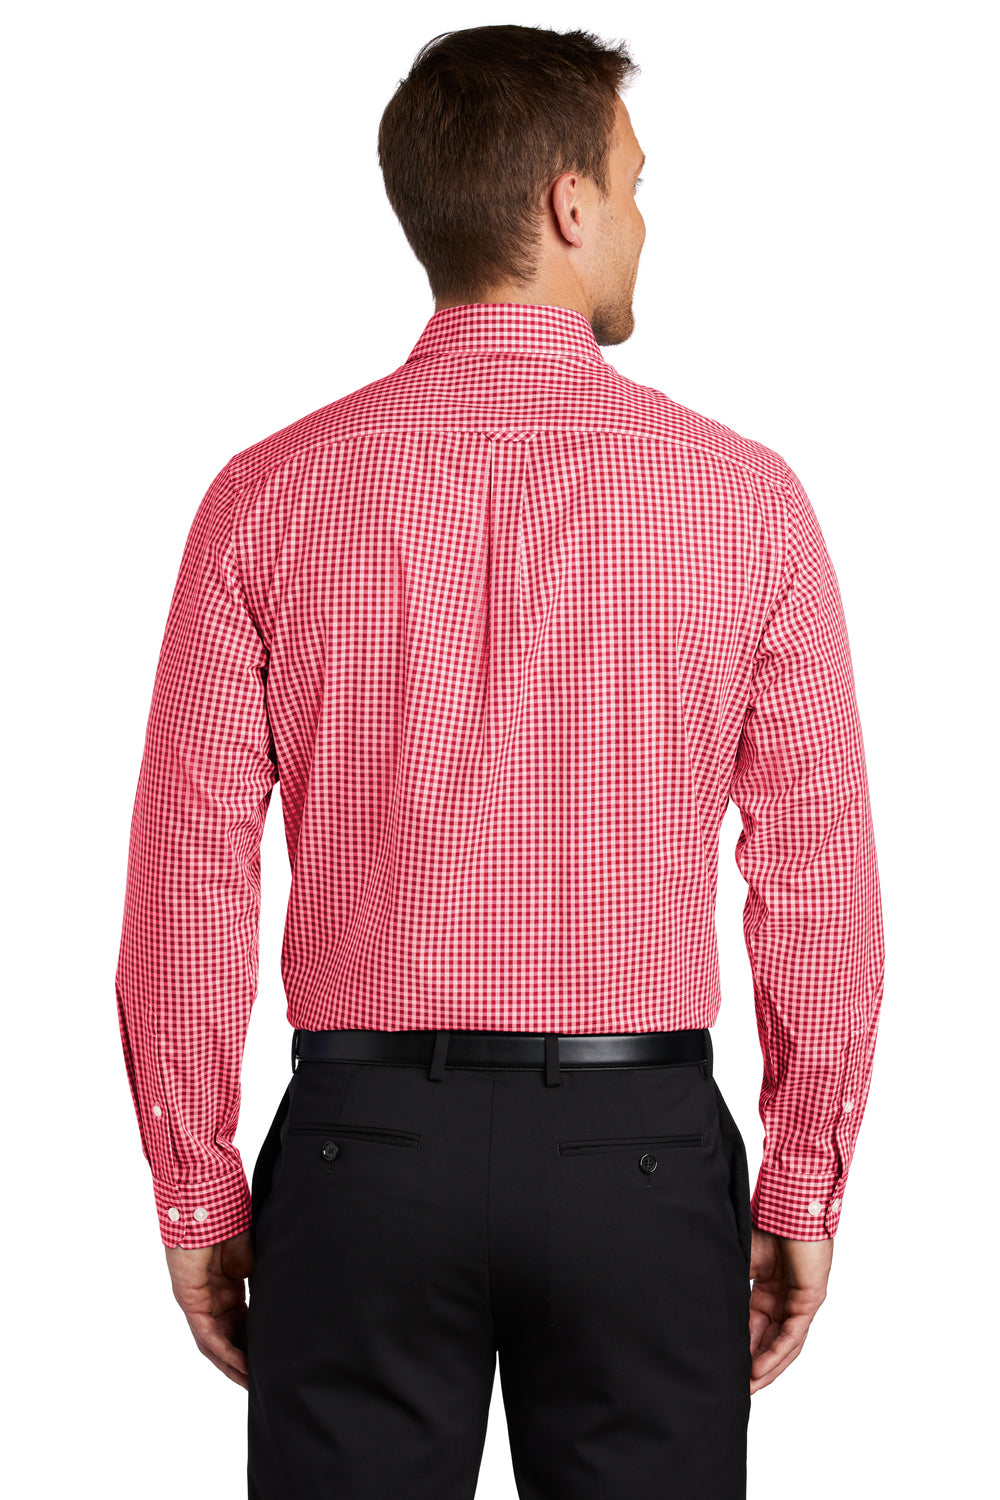 Port Authority Mens Broadcloth Gingham Long Sleeve Button Down Shirt w/ Pocket Rich Red/White Side